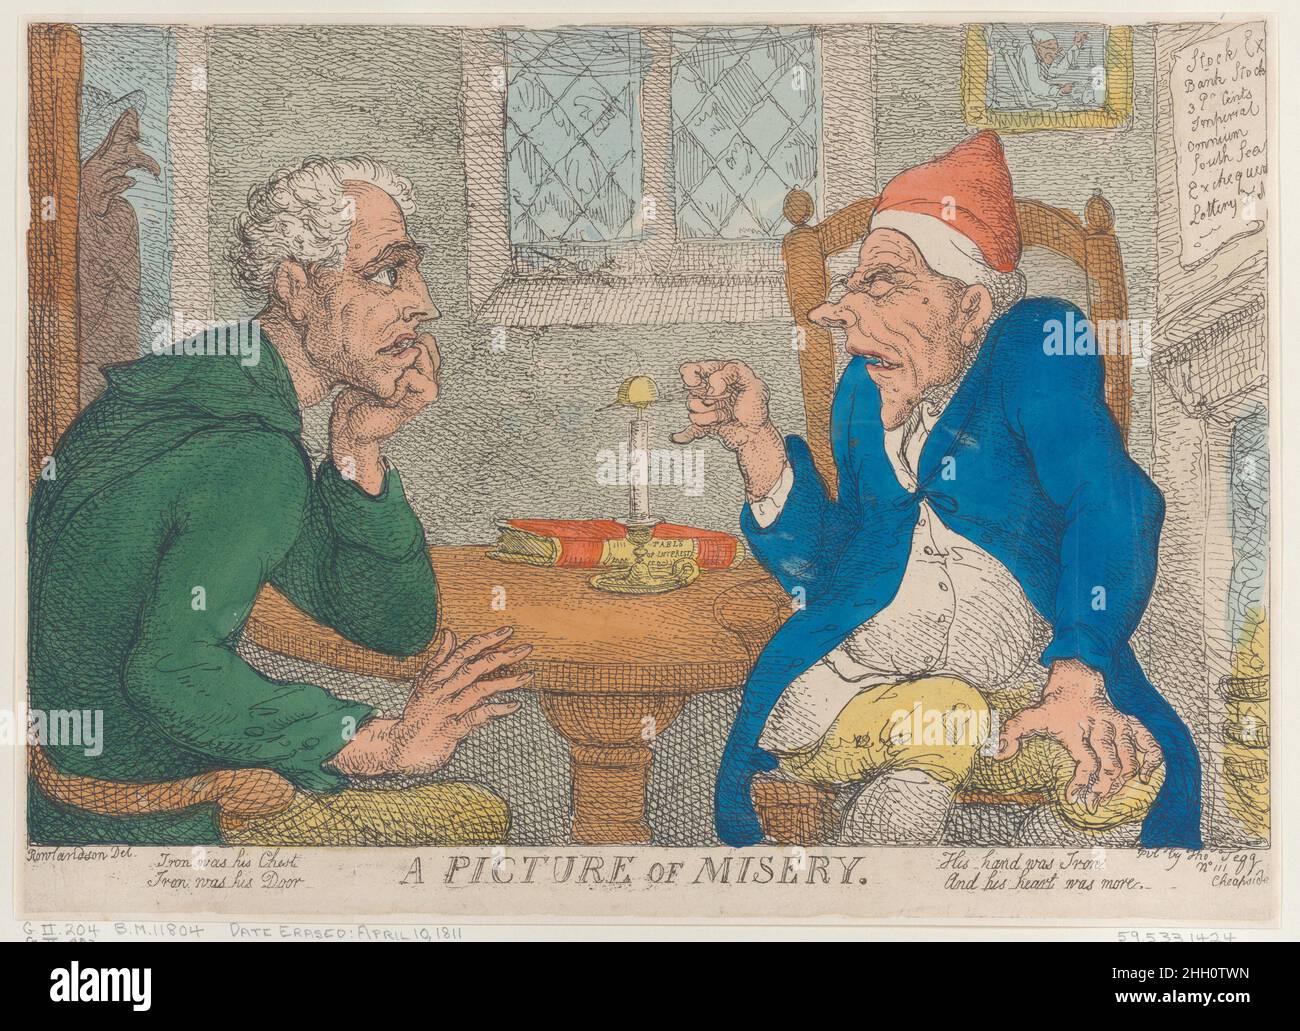 A Picture of Misery April 10, 1811 Thomas Rowlandson An old miser sits between the fireplace and a table, snuffing a candle. He ignores a man seated opposite him, who waits in agony. On the table is a large book, 'Table of Interest.'. A Picture of Misery. Thomas Rowlandson (British, London 1757–1827 London). April 10, 1811. Hand-colored etching. Thomas Tegg (British, 1776–1846). Prints Stock Photo